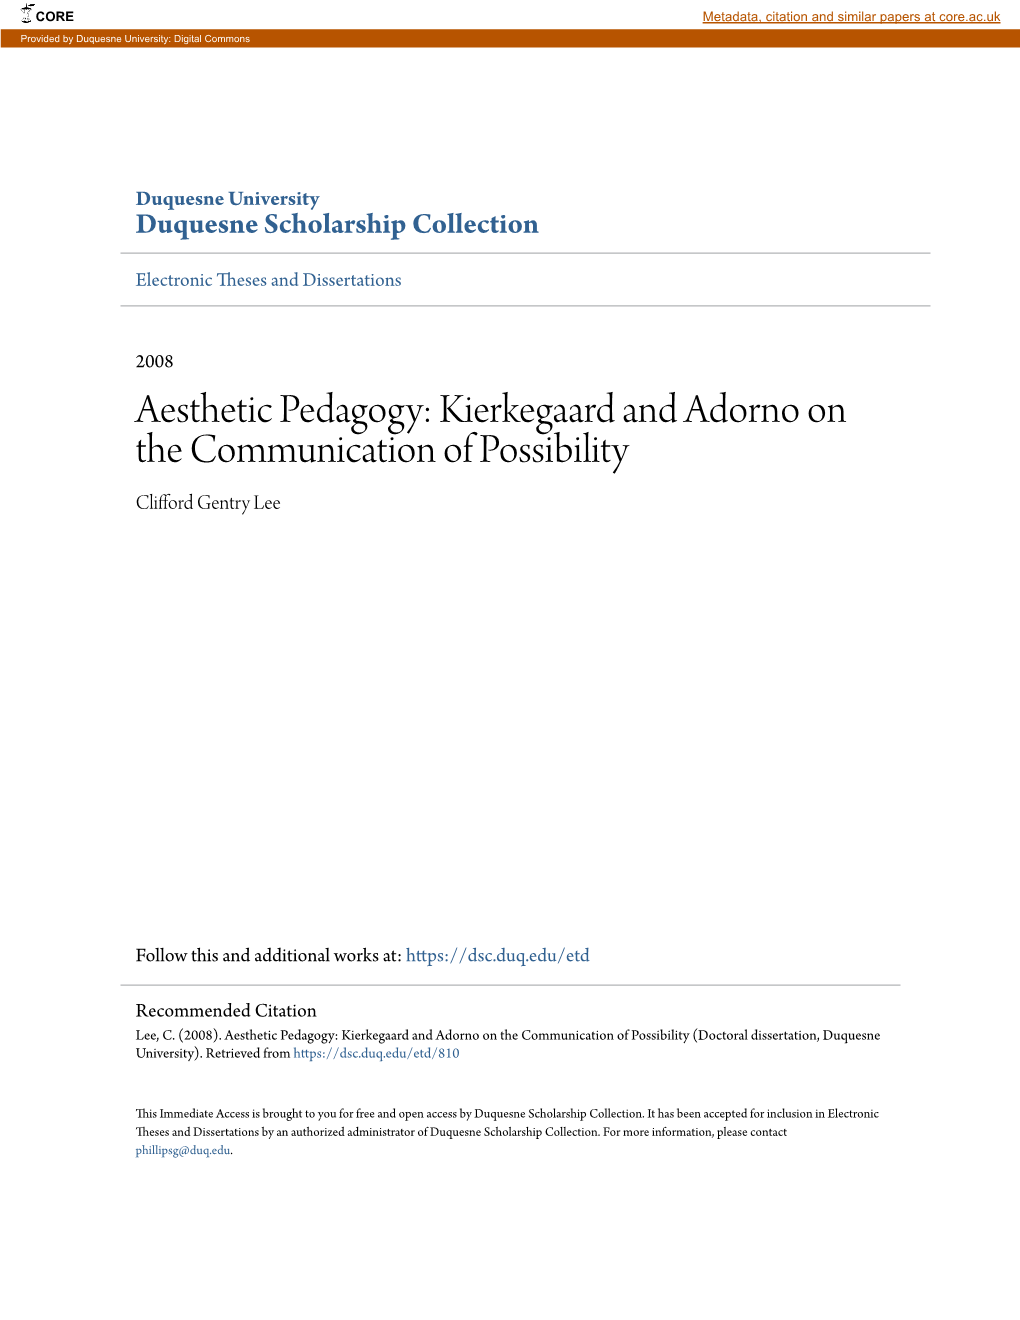 Kierkegaard and Adorno on the Communication of Possibility Clifford Gentry Lee